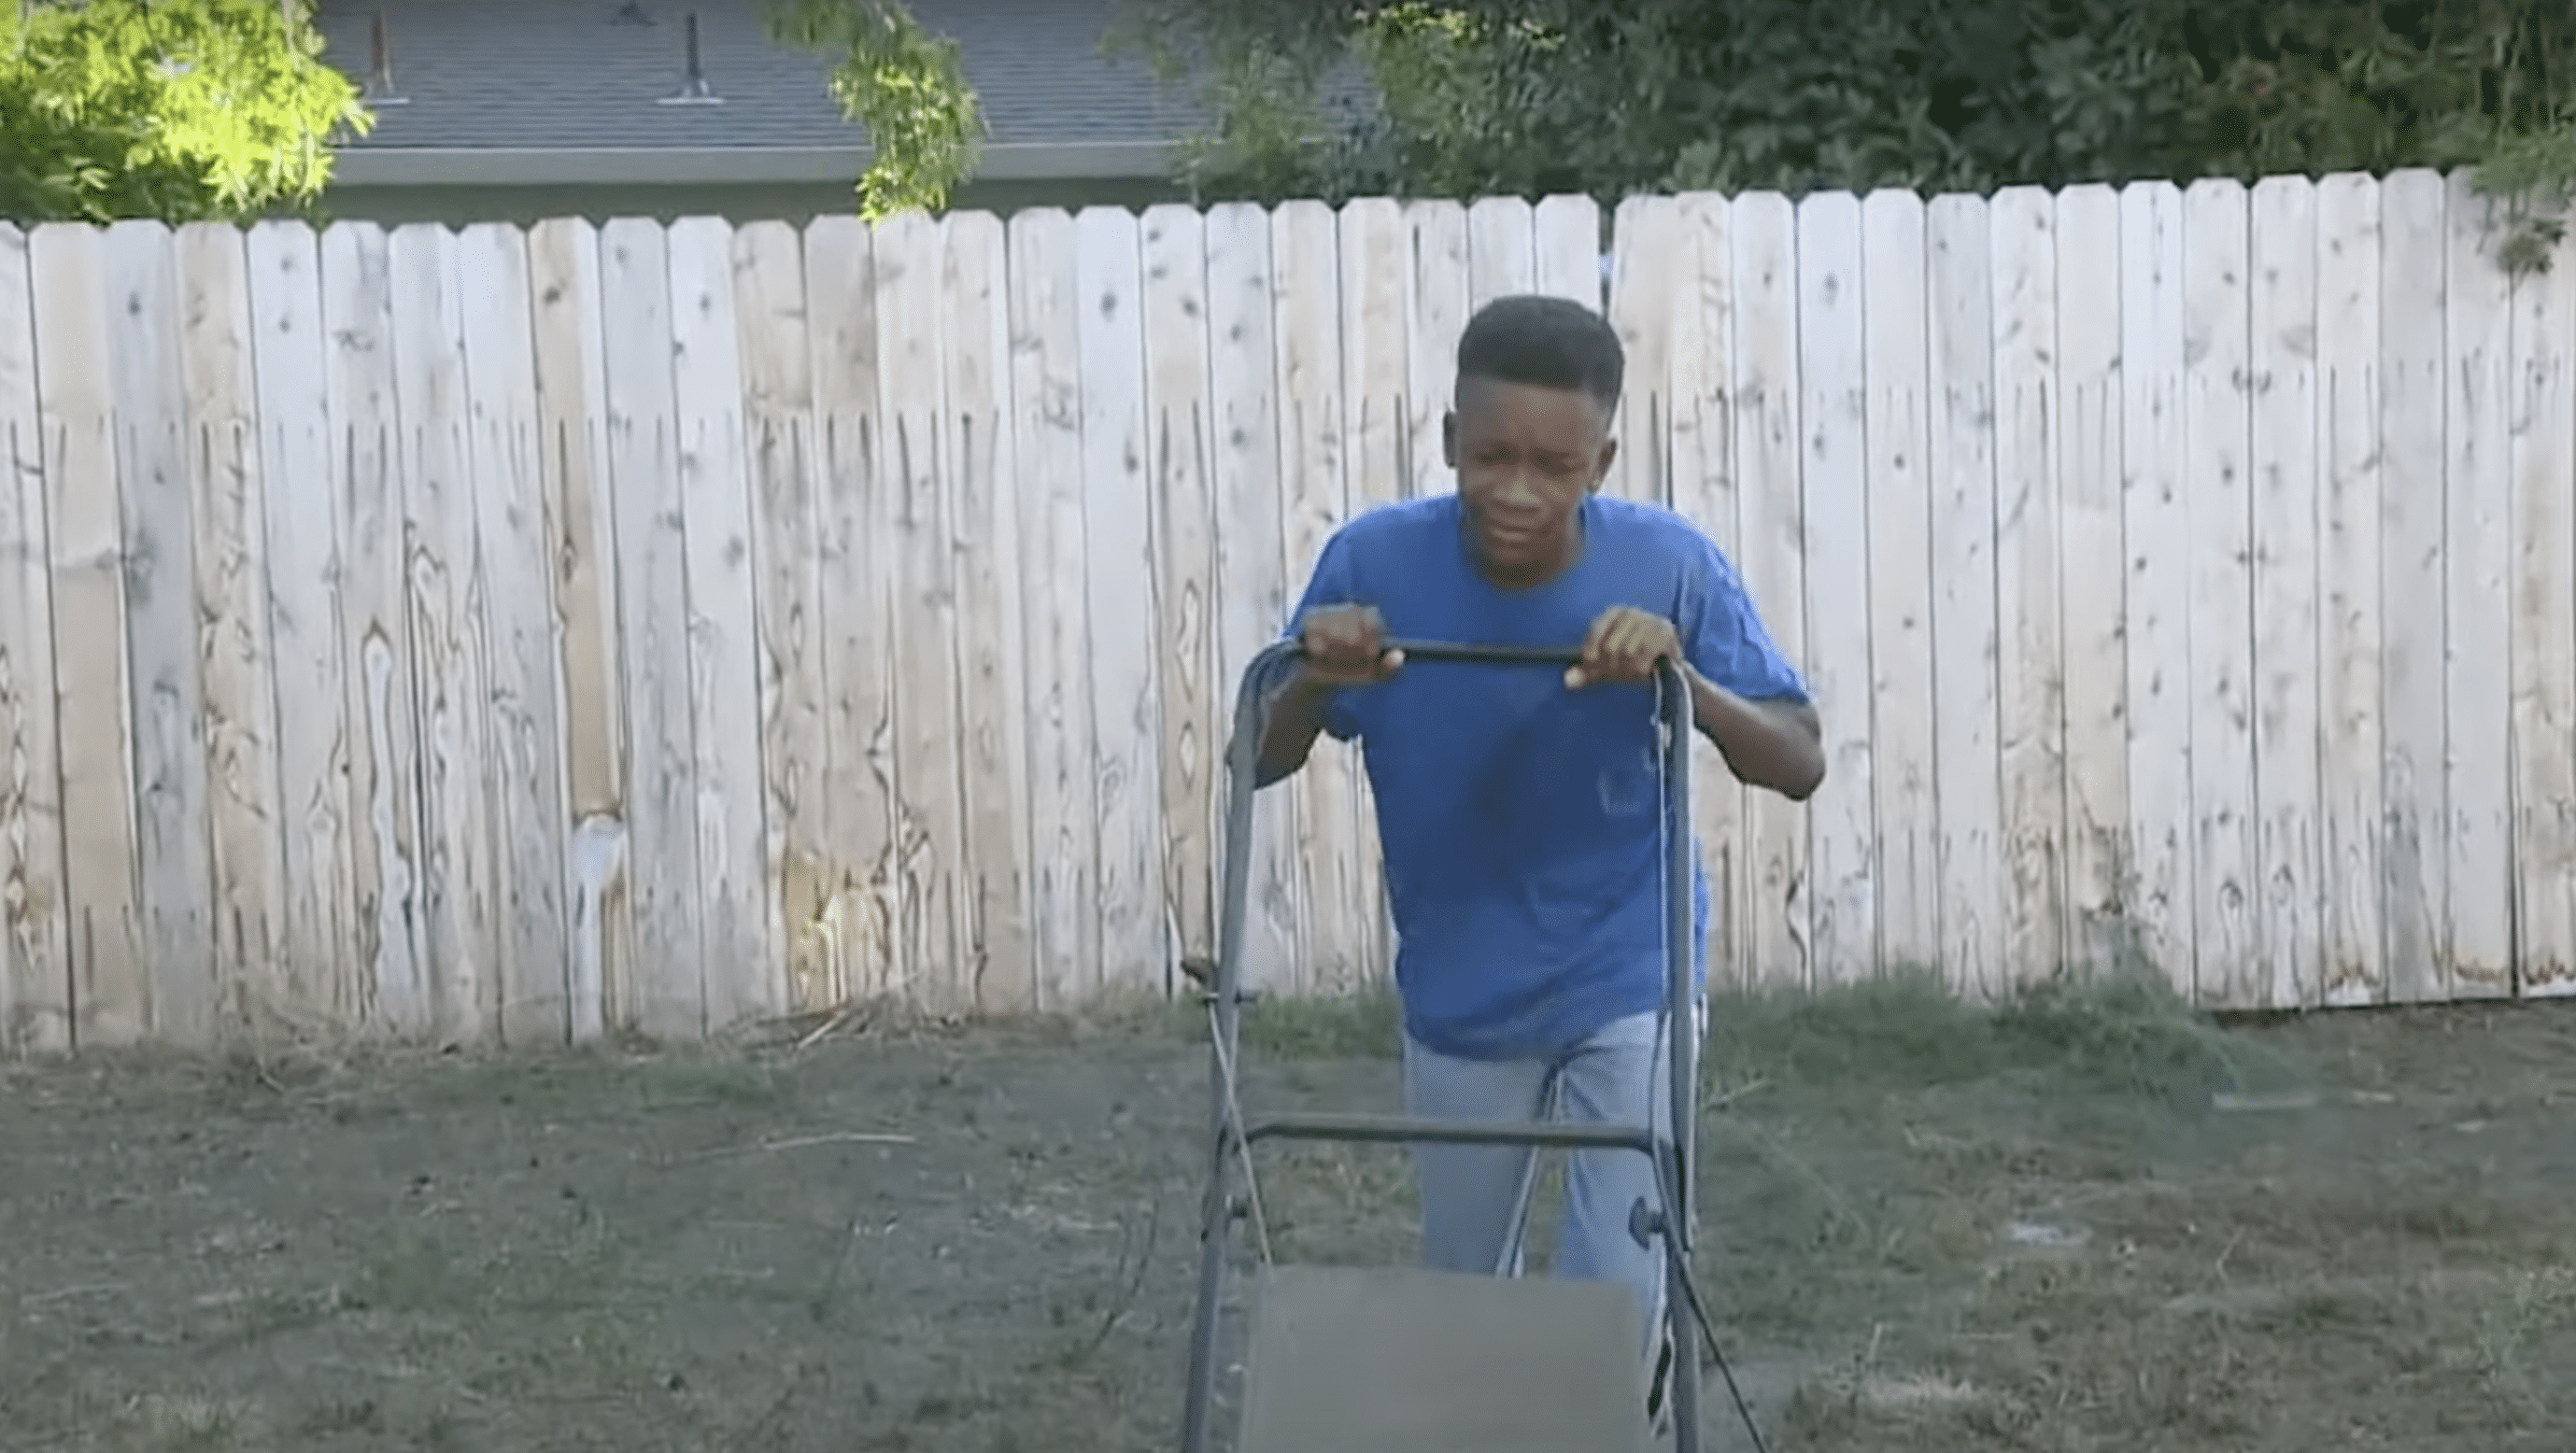 Johnson pictured while handling the lawn mower. | Source: youtube.com/FOX40 News